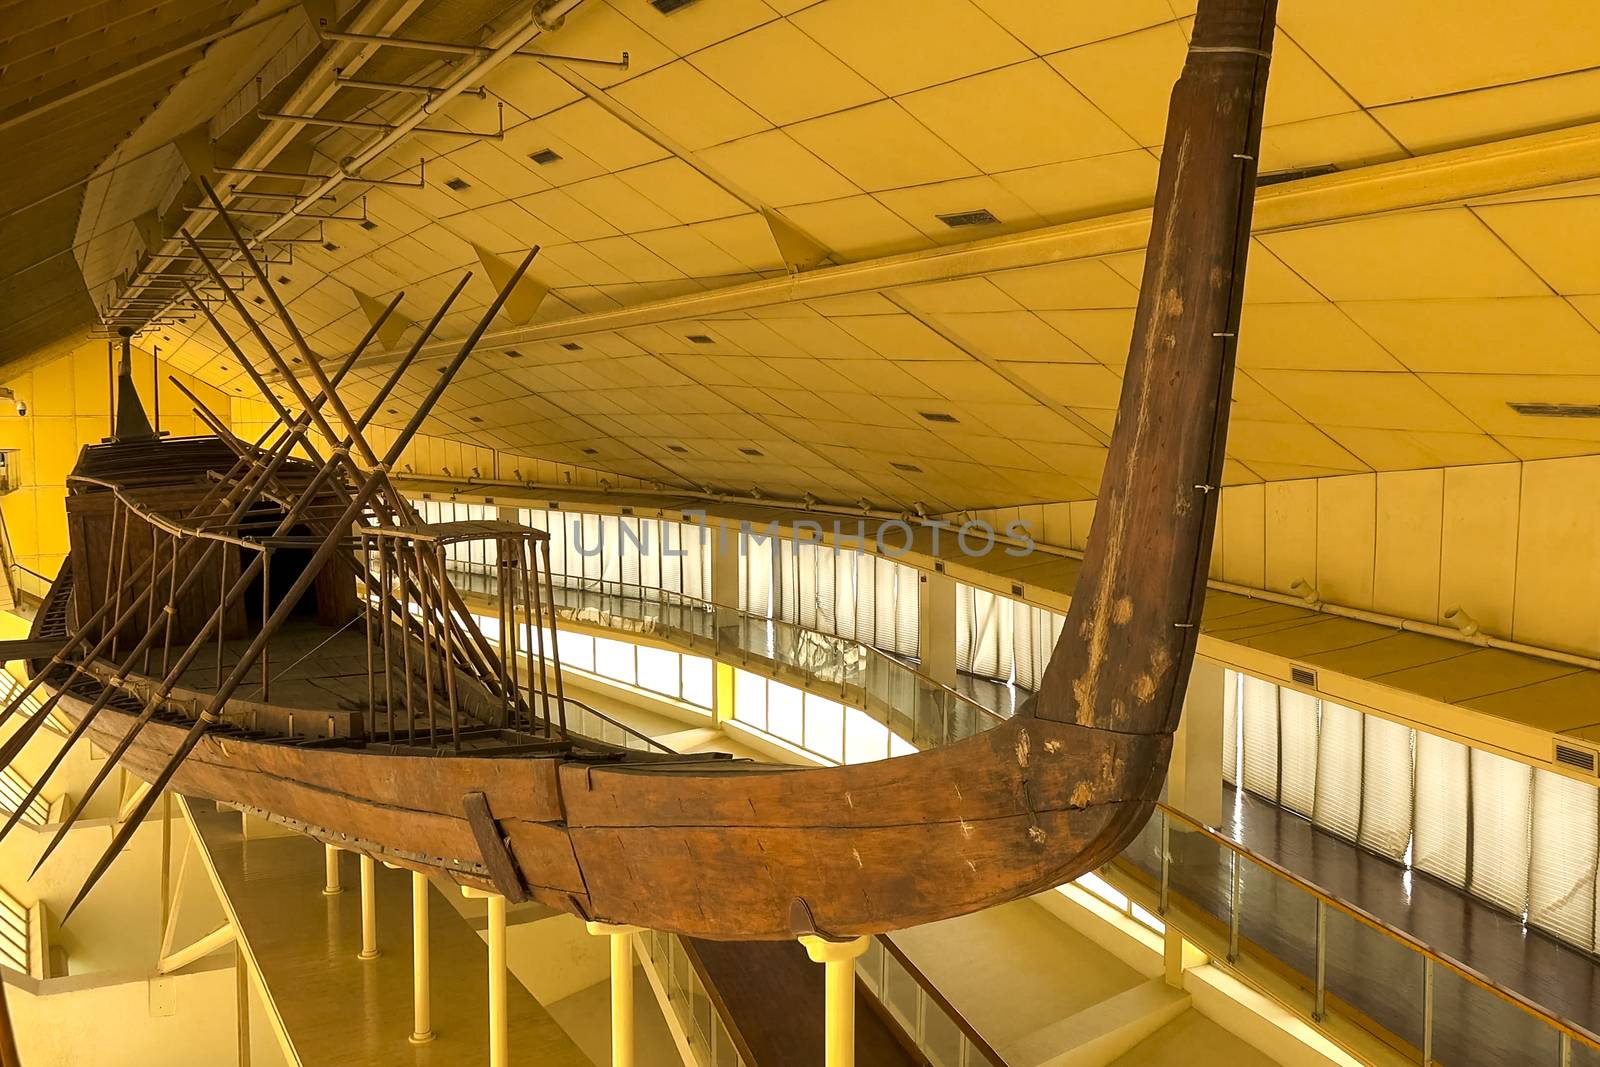 Ancient Egyptian galley. Ancient ships in the museum by nyrok